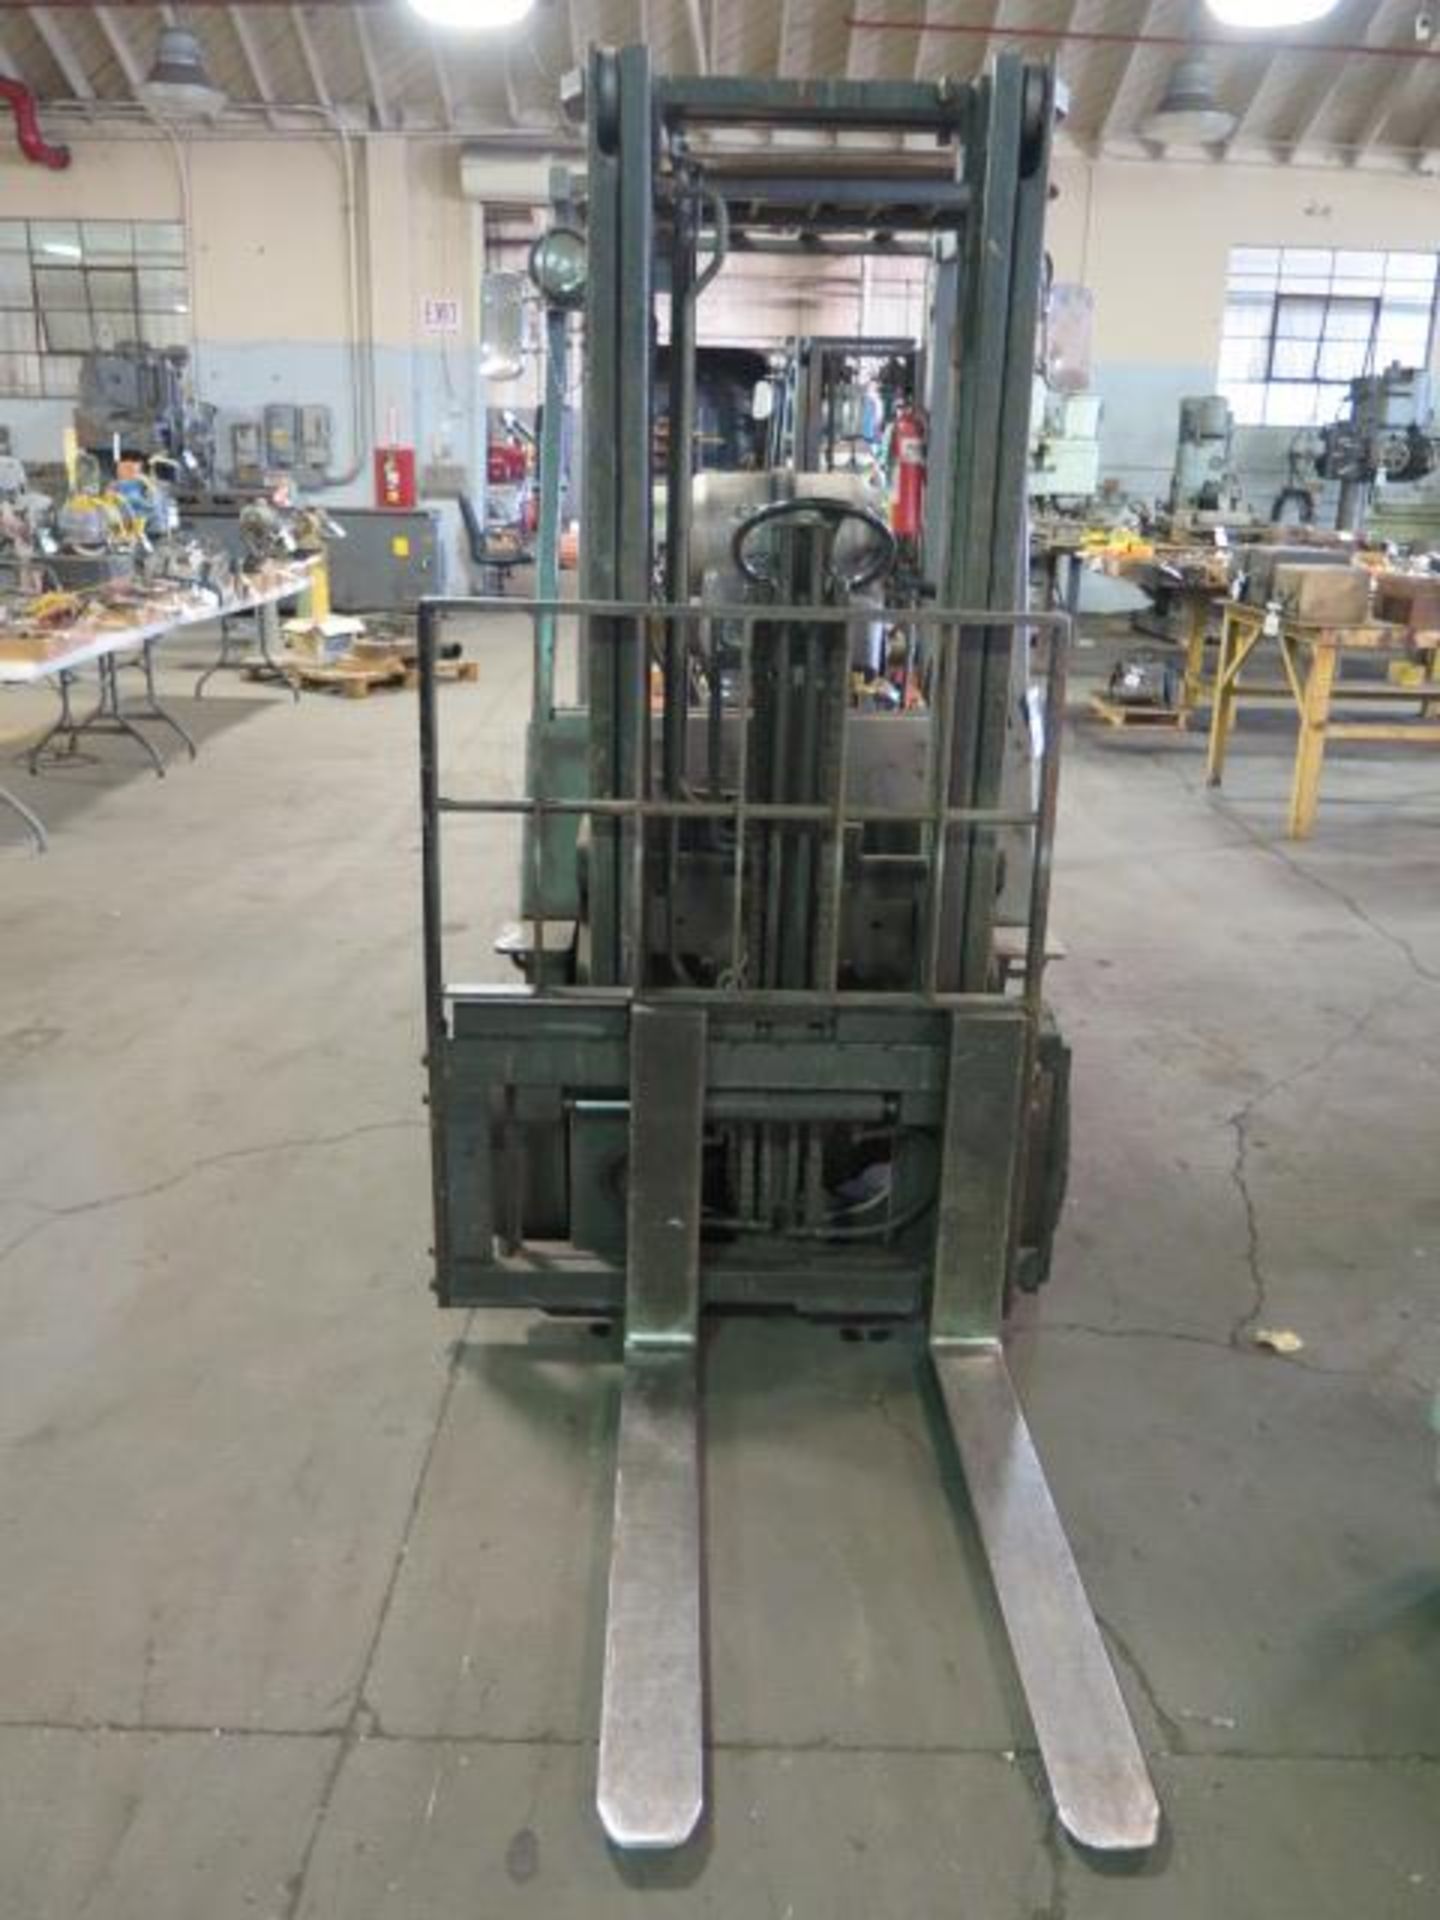 Toyota 42-6FGCU30 6000 Lb Cap LPG Forklift s/n 60775 w/ 2-Stage Mast, 132” Lift Height, SOLD AS IS - Image 3 of 15